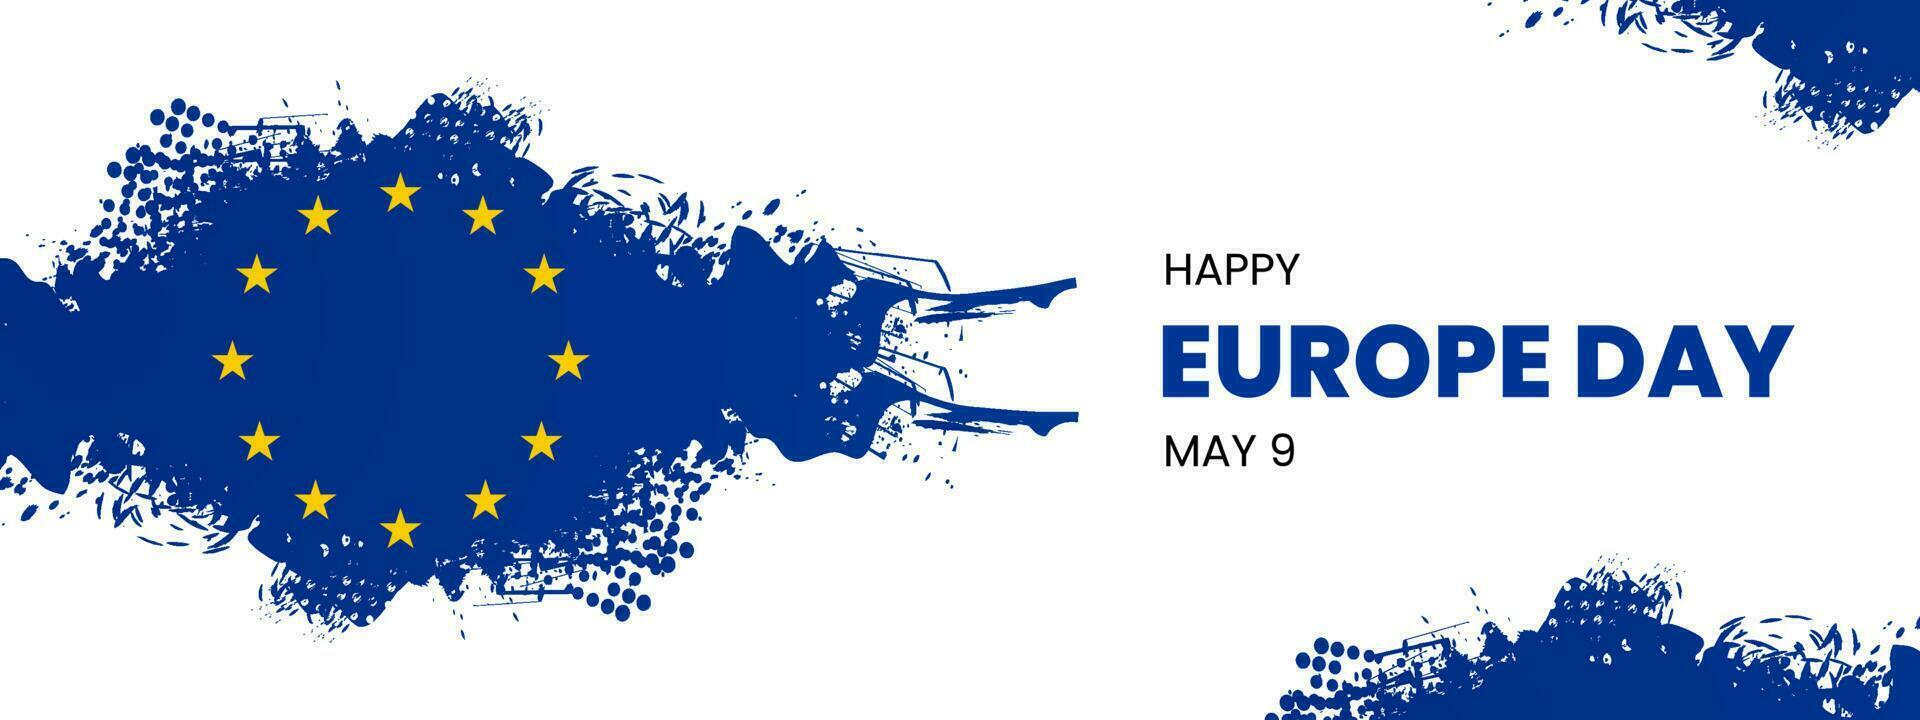 Europe Day on May 9 Vector illustration. Annual public holiday in May. celebration, card, poster, logo, words, text written on blue painted backgroun. Victory in Europe Day.